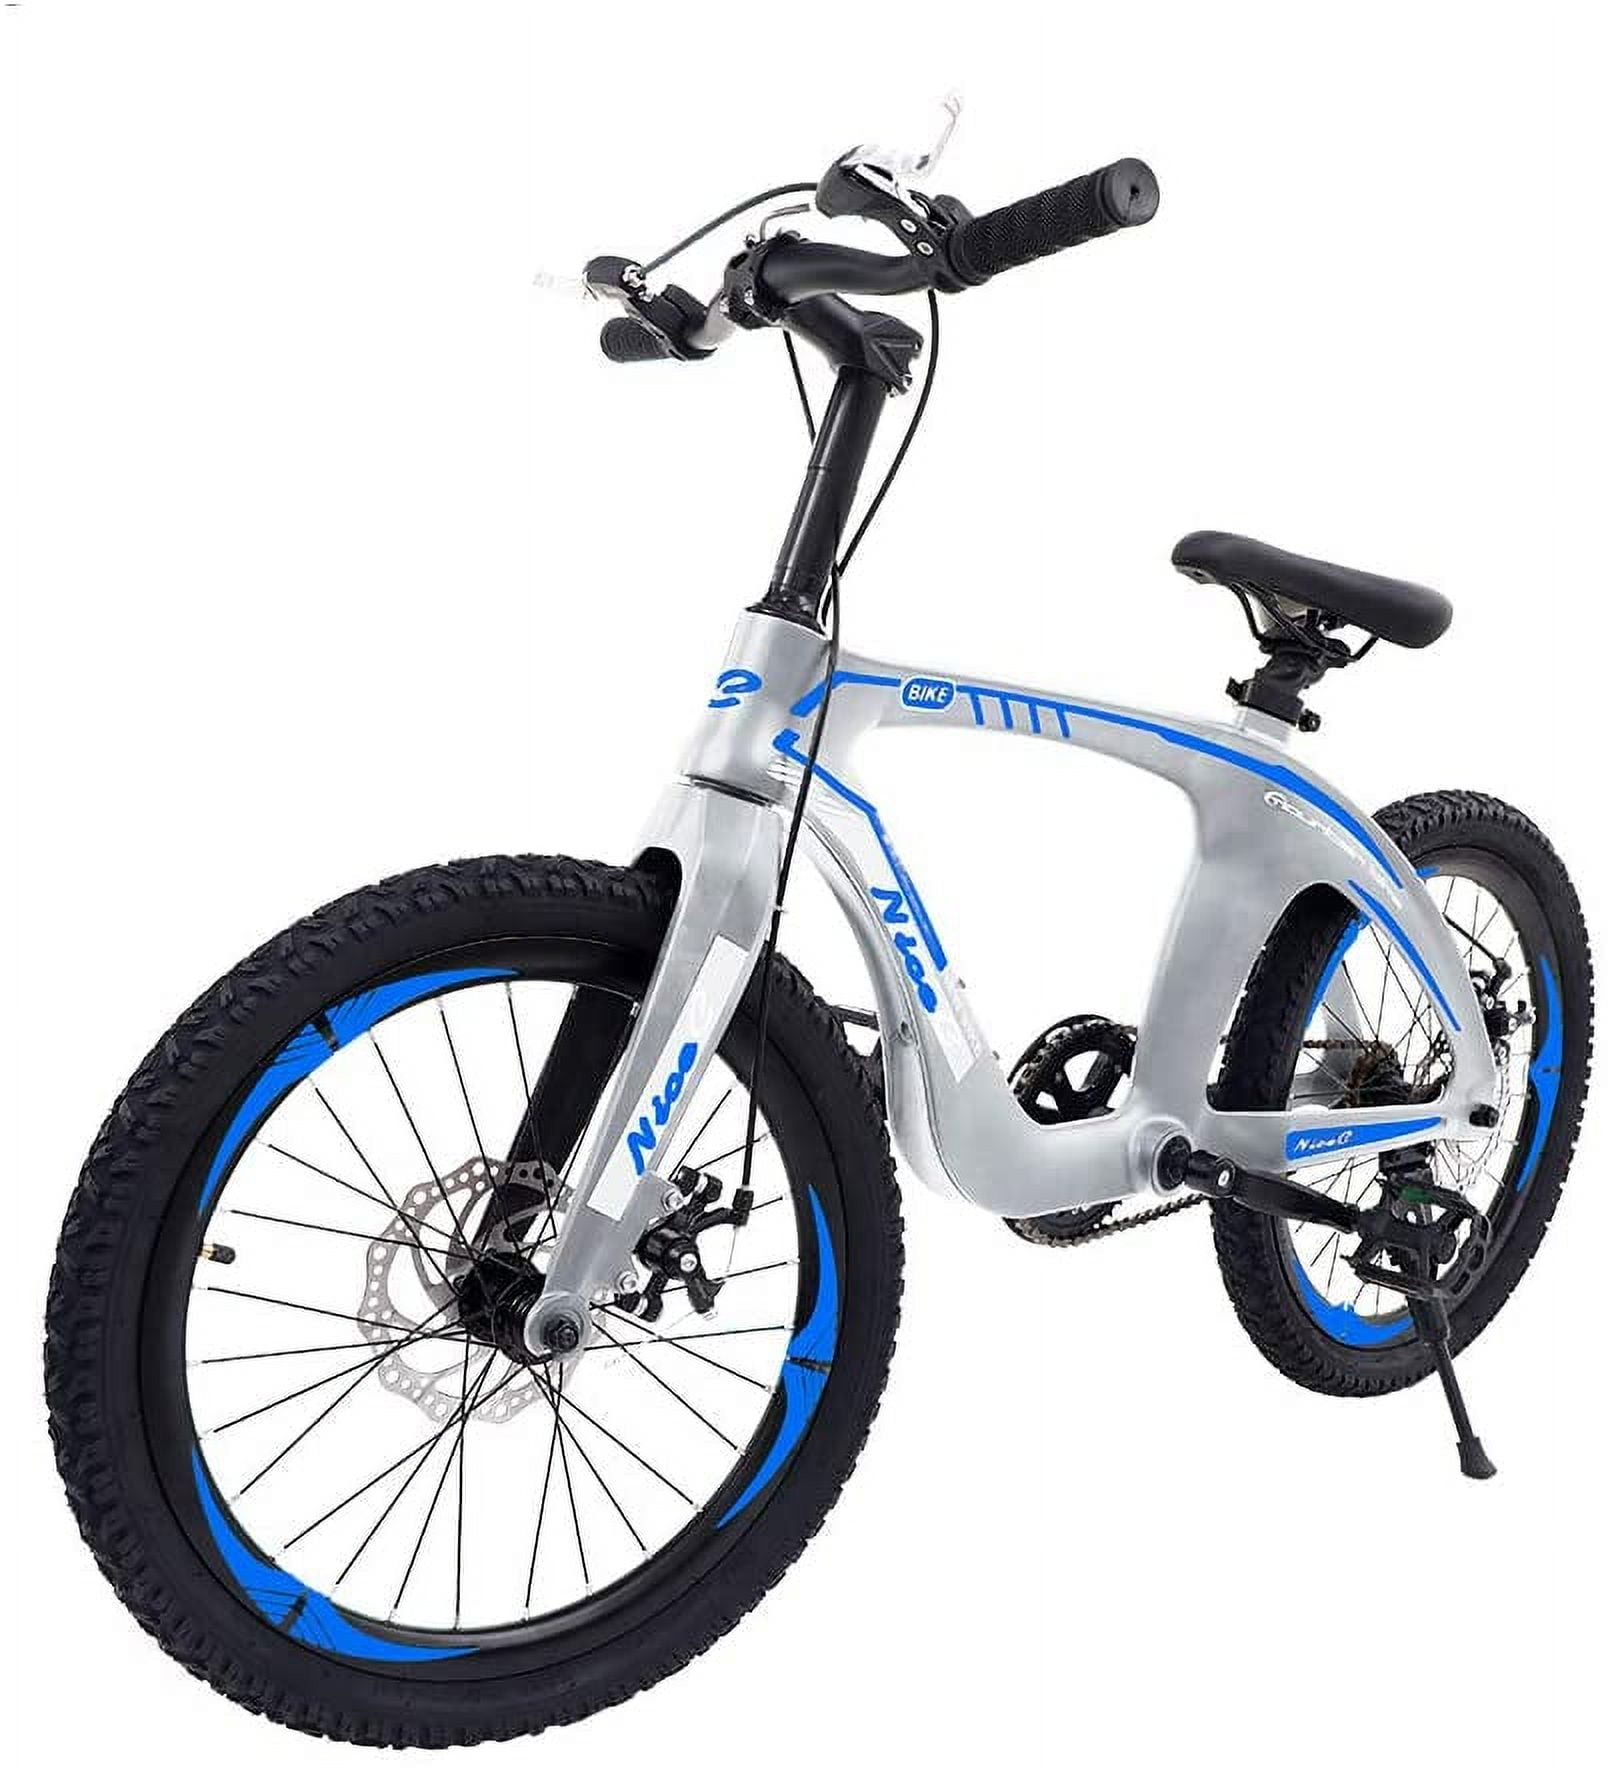 NiceC BMX Bike, Mountain Bike, 20” Cycle Bicycle with Dual Disc Brakes,  Ultralight for Boys and Girls (20" Silver)